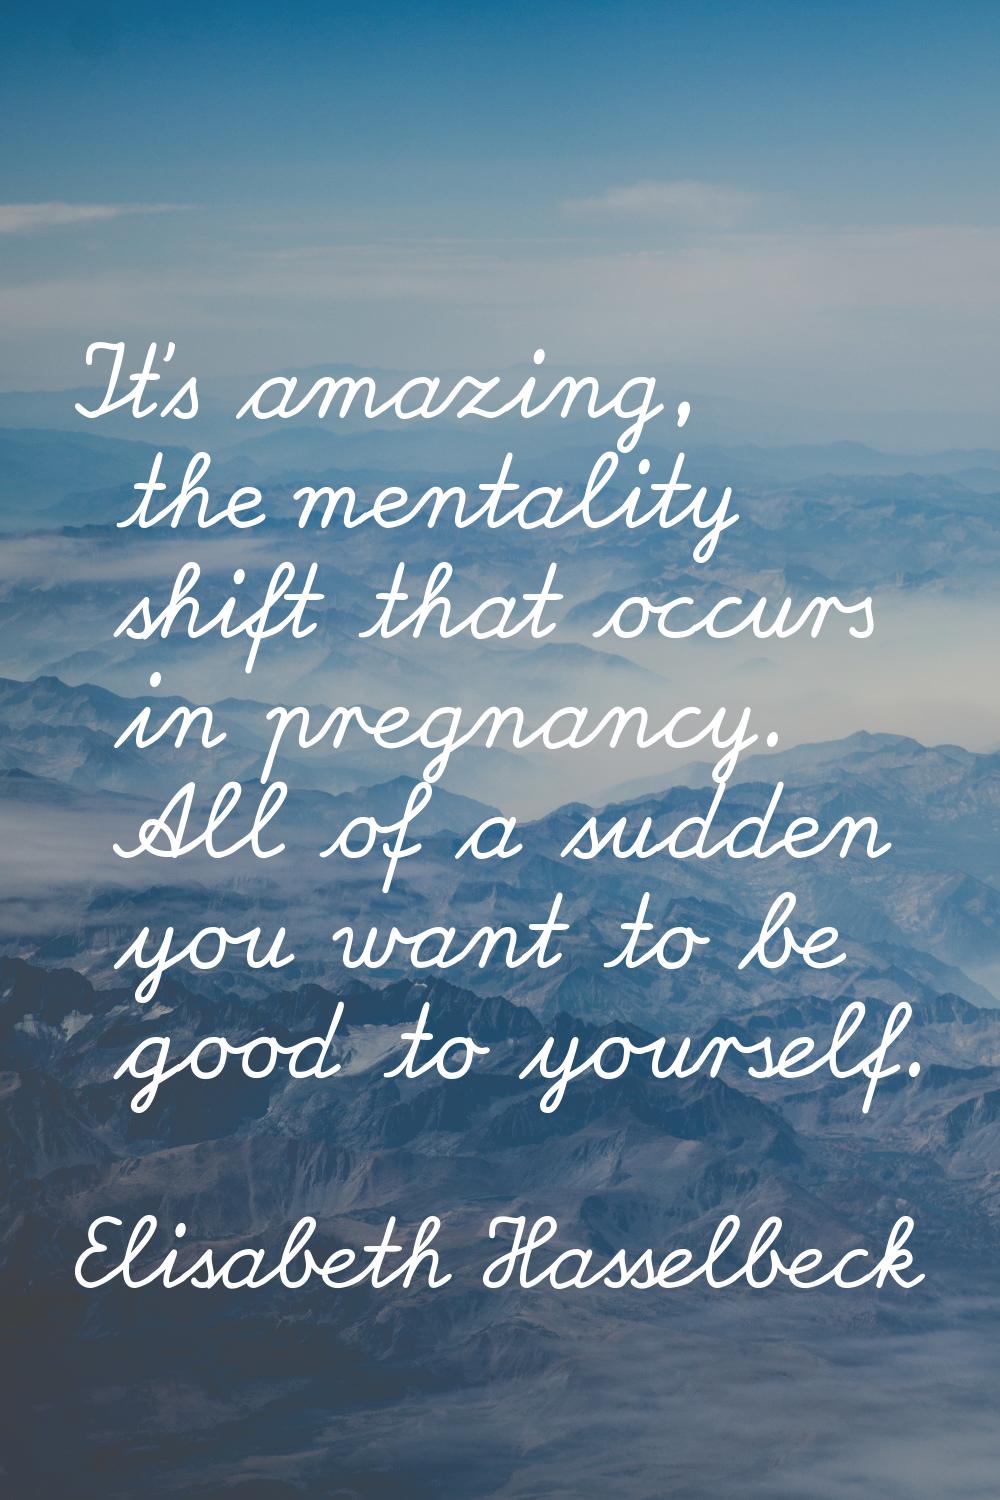 It's amazing, the mentality shift that occurs in pregnancy. All of a sudden you want to be good to 